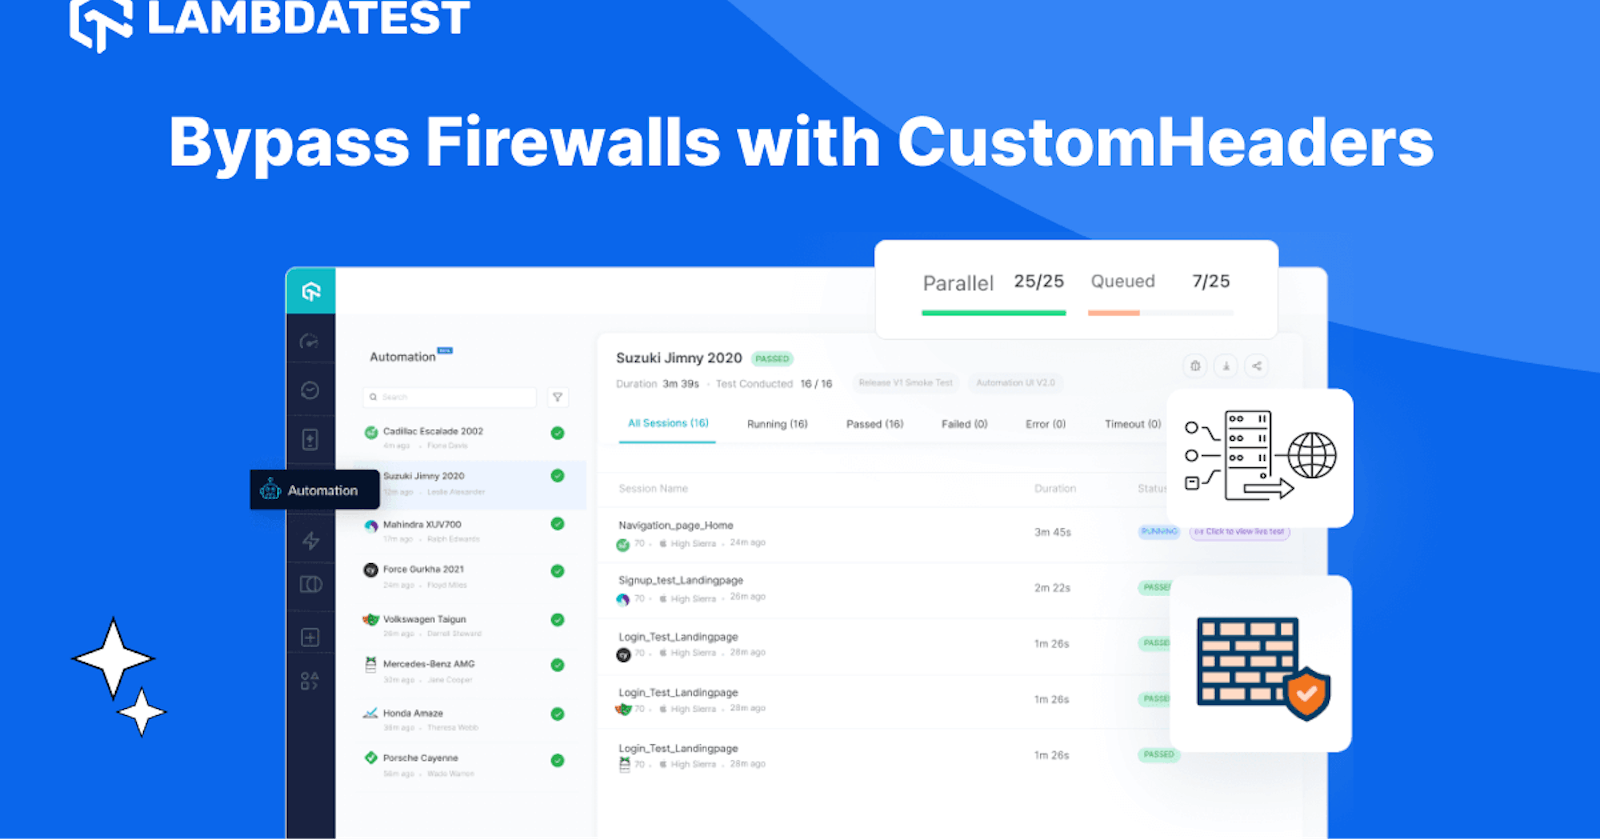 Seamlessly Bypass Firewalls With The All-New CustomHeaders Capability